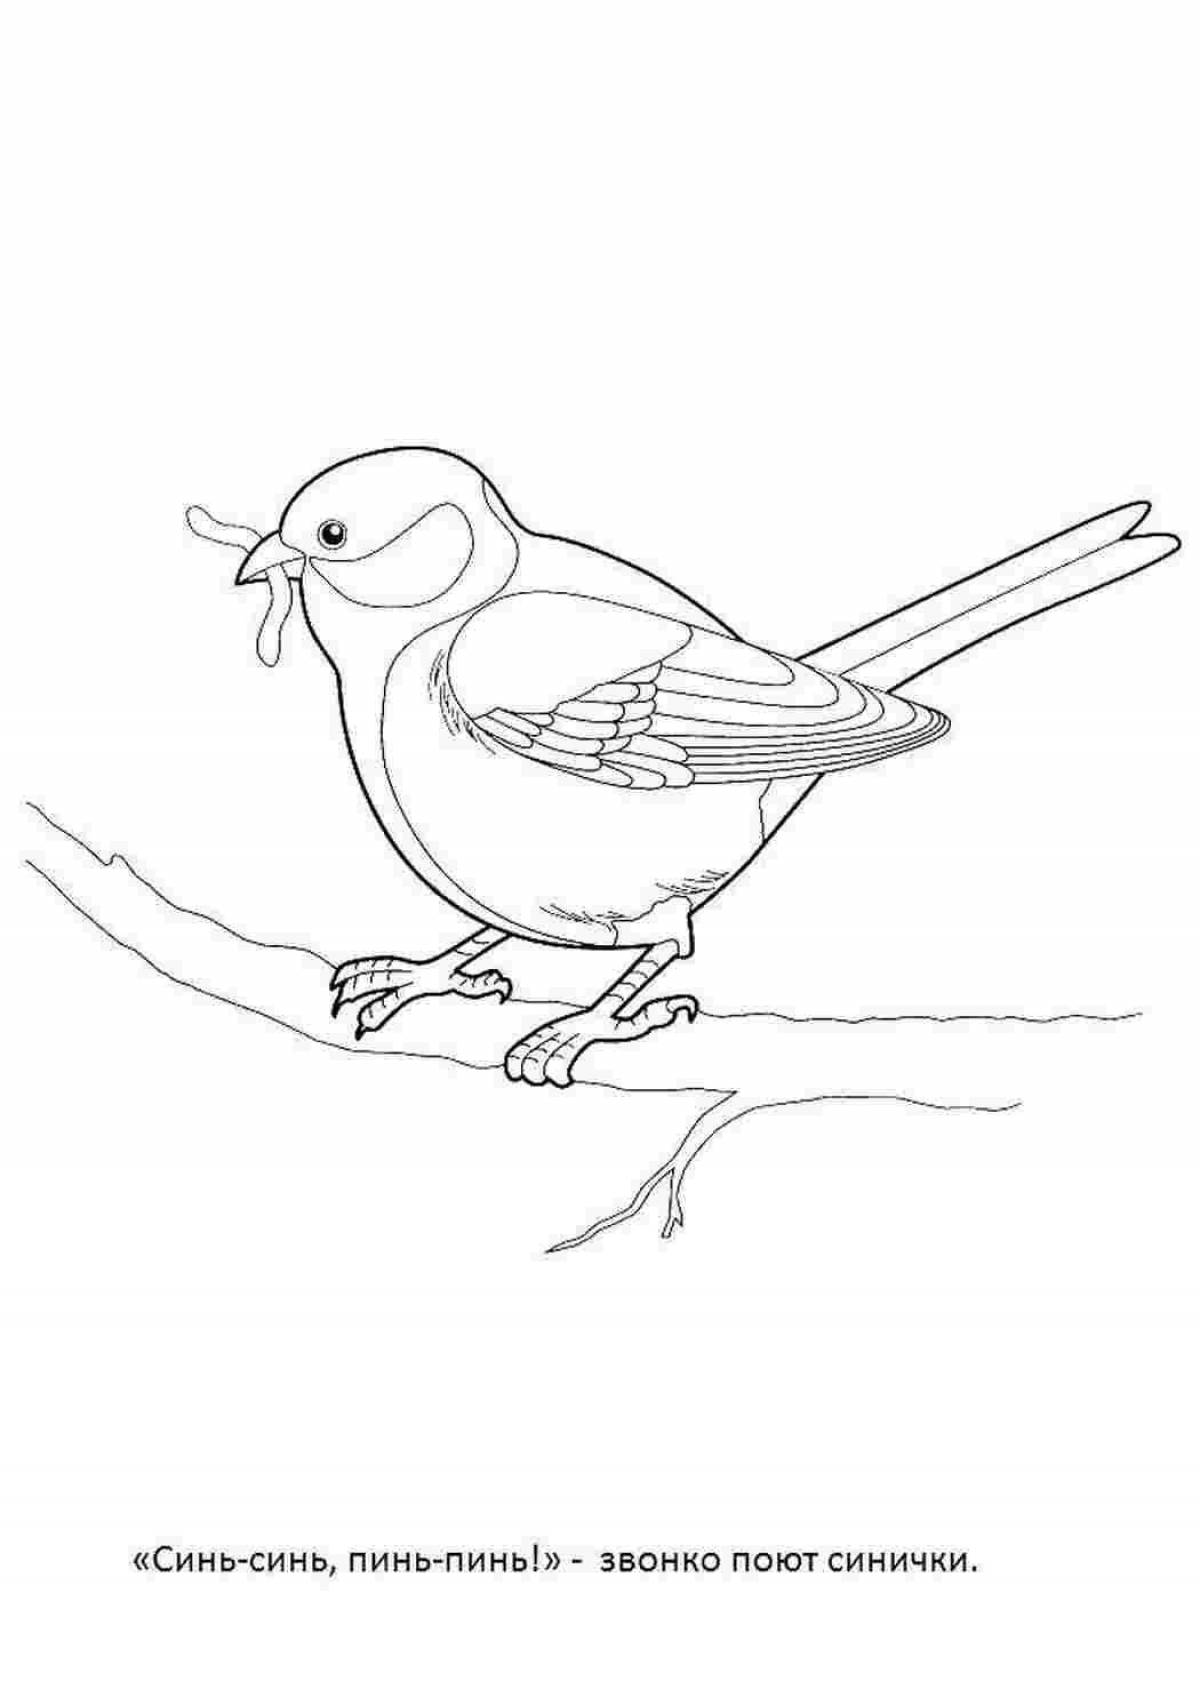 Colorful titmouse coloring book for children 4-5 years old